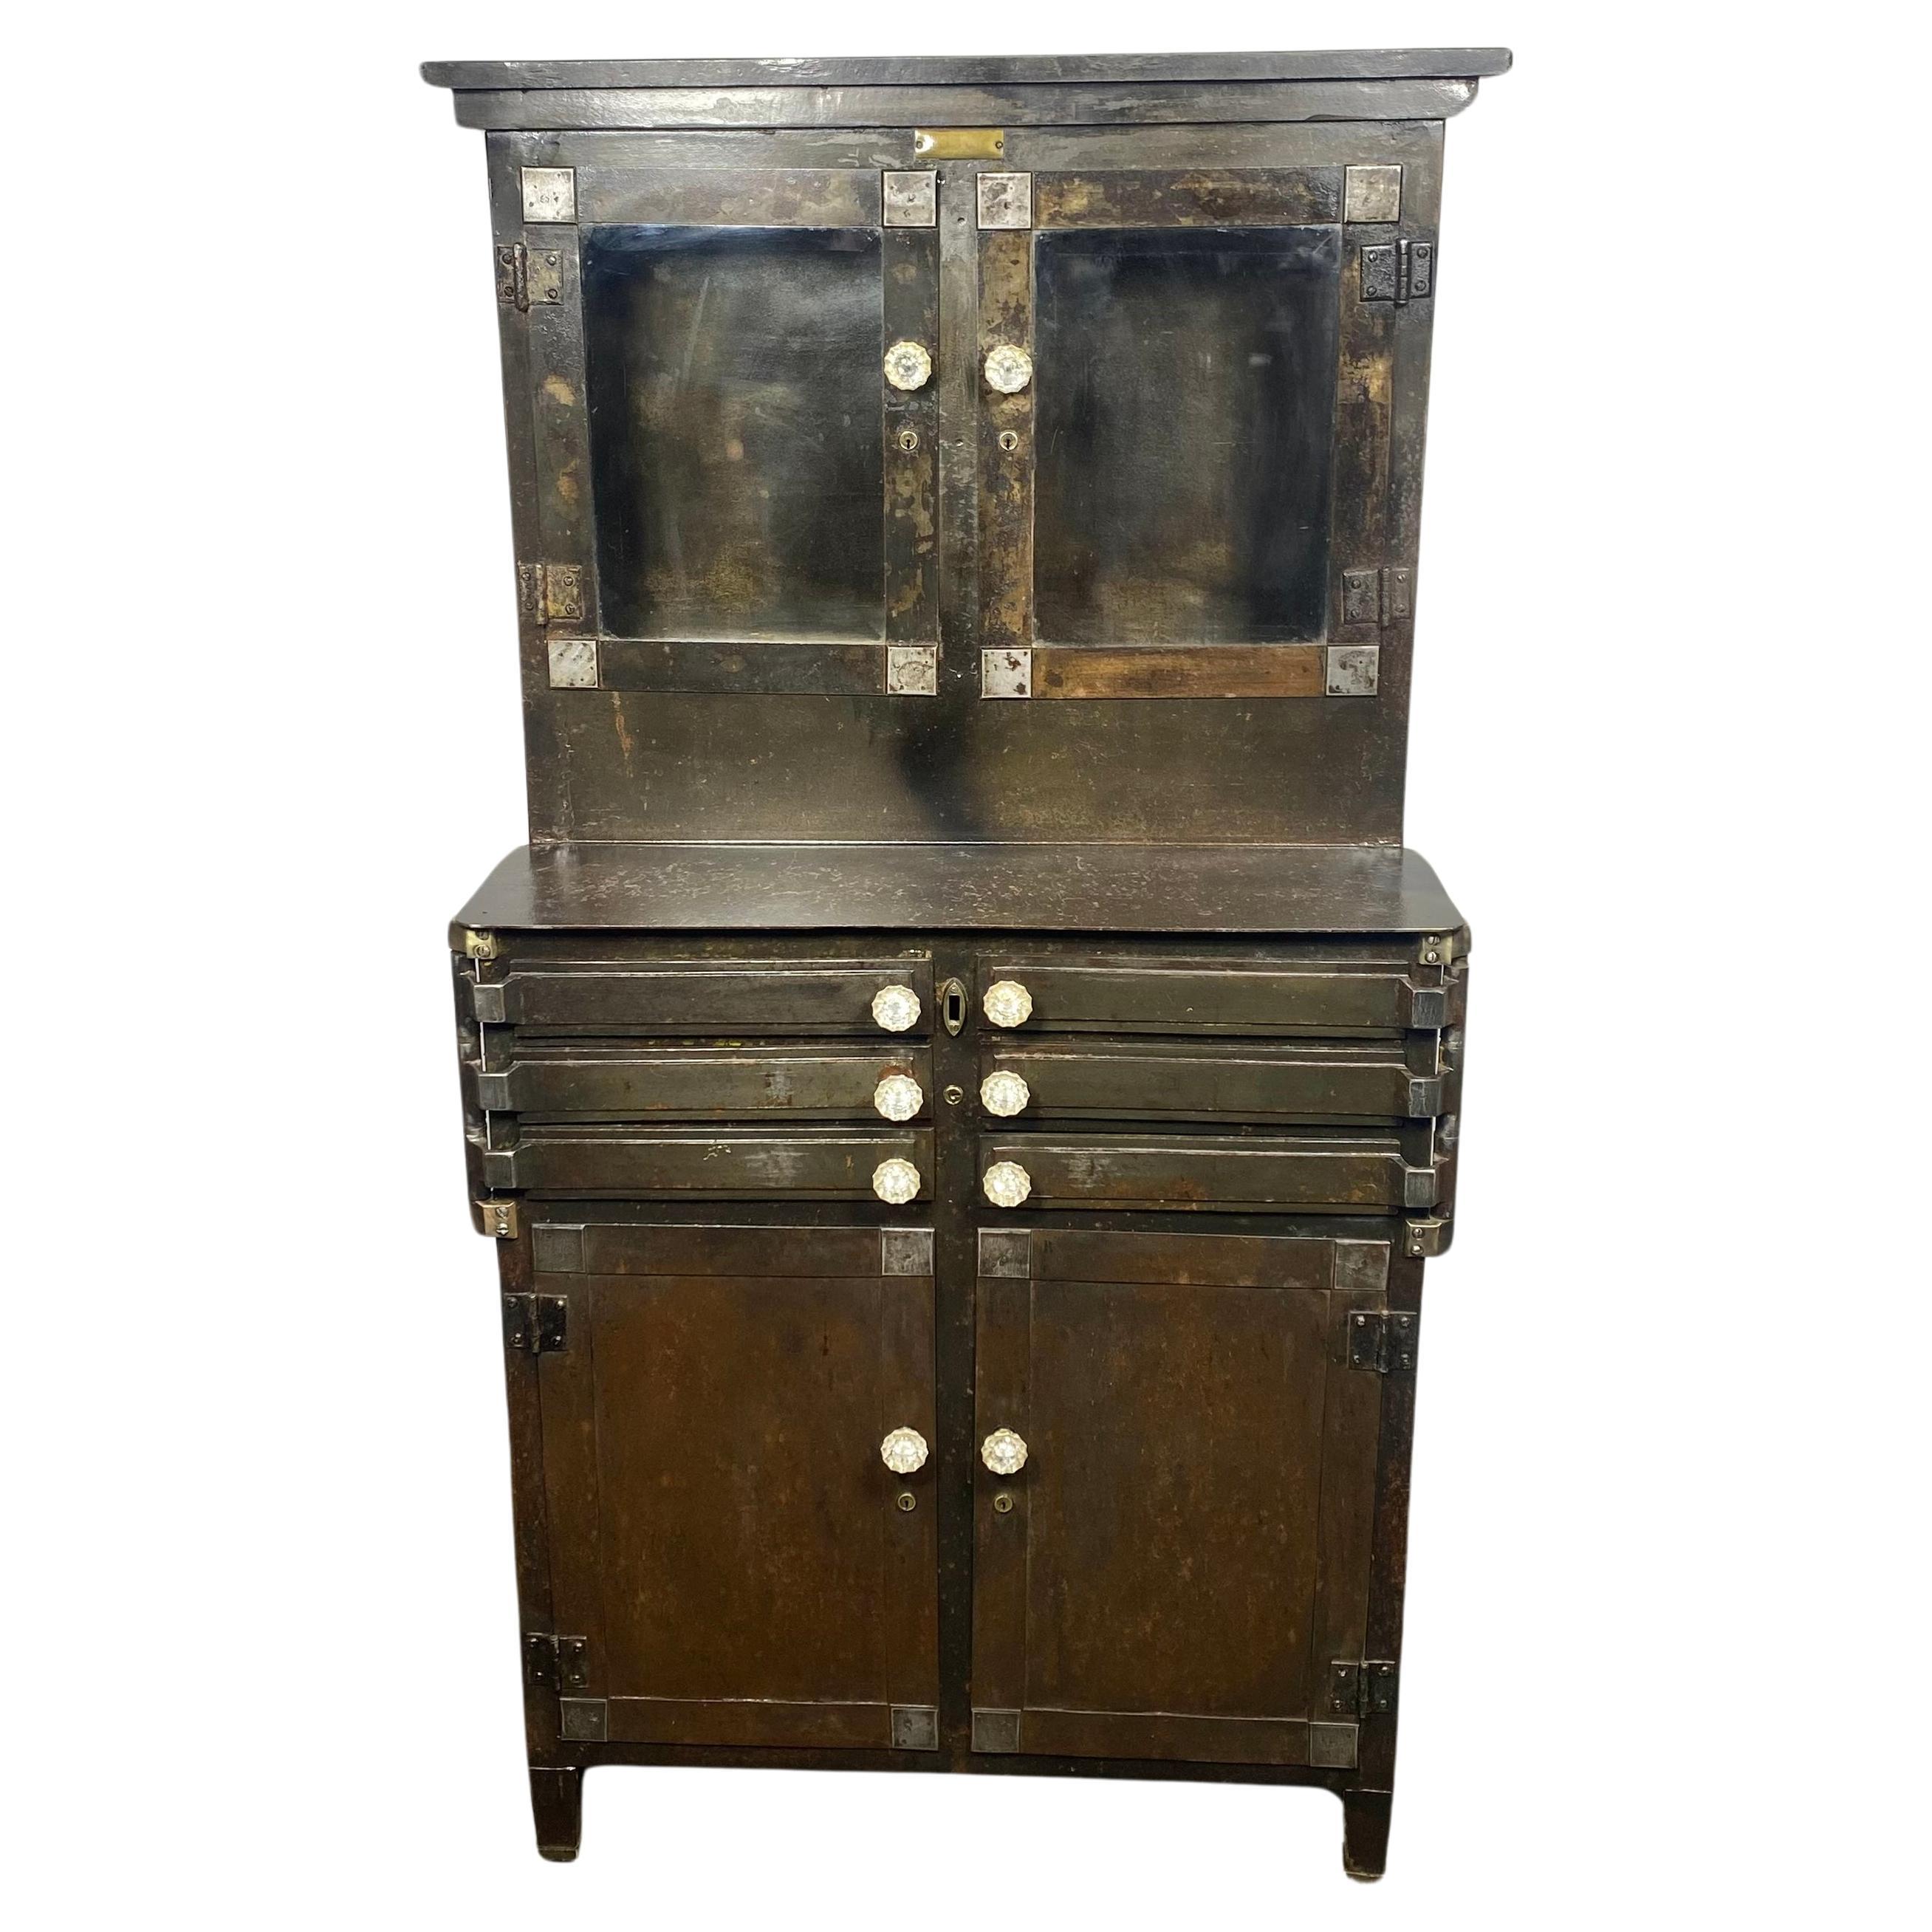 Nickel and Steel Aseptic Dental Cabinet, Lee S. Smith Co., circa 1920